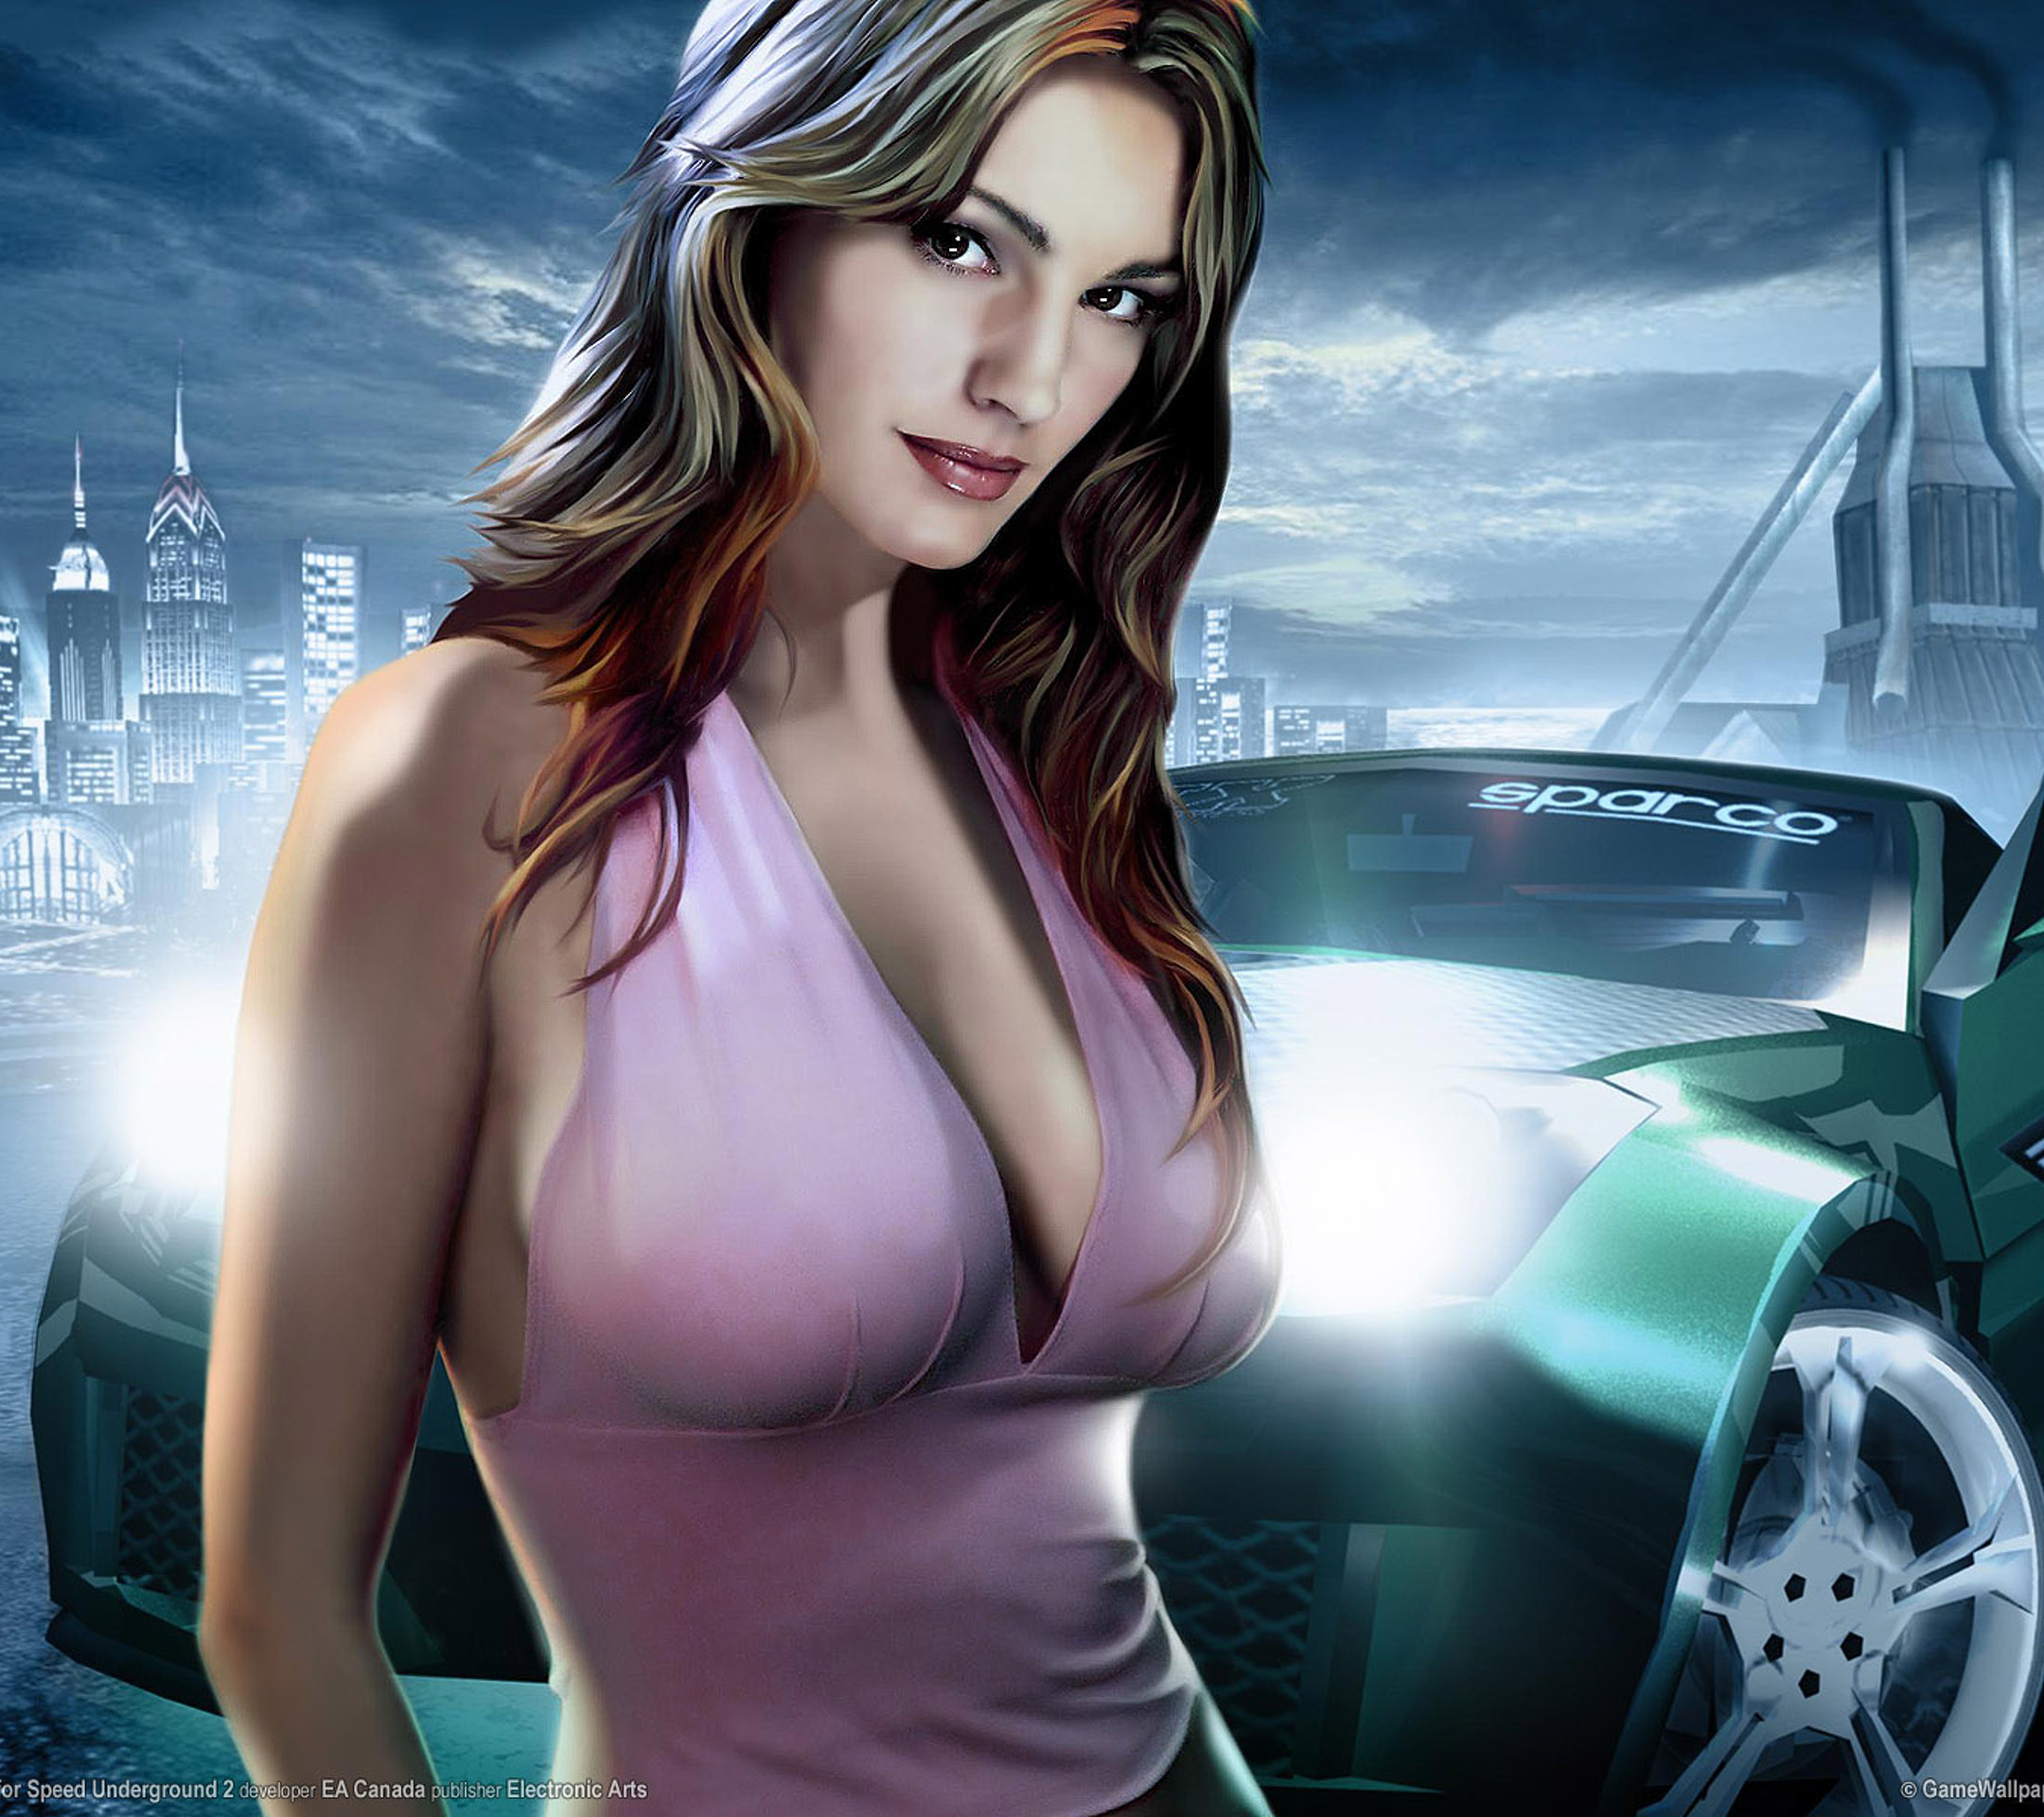 video game, need for speed: underground 2, need for speed